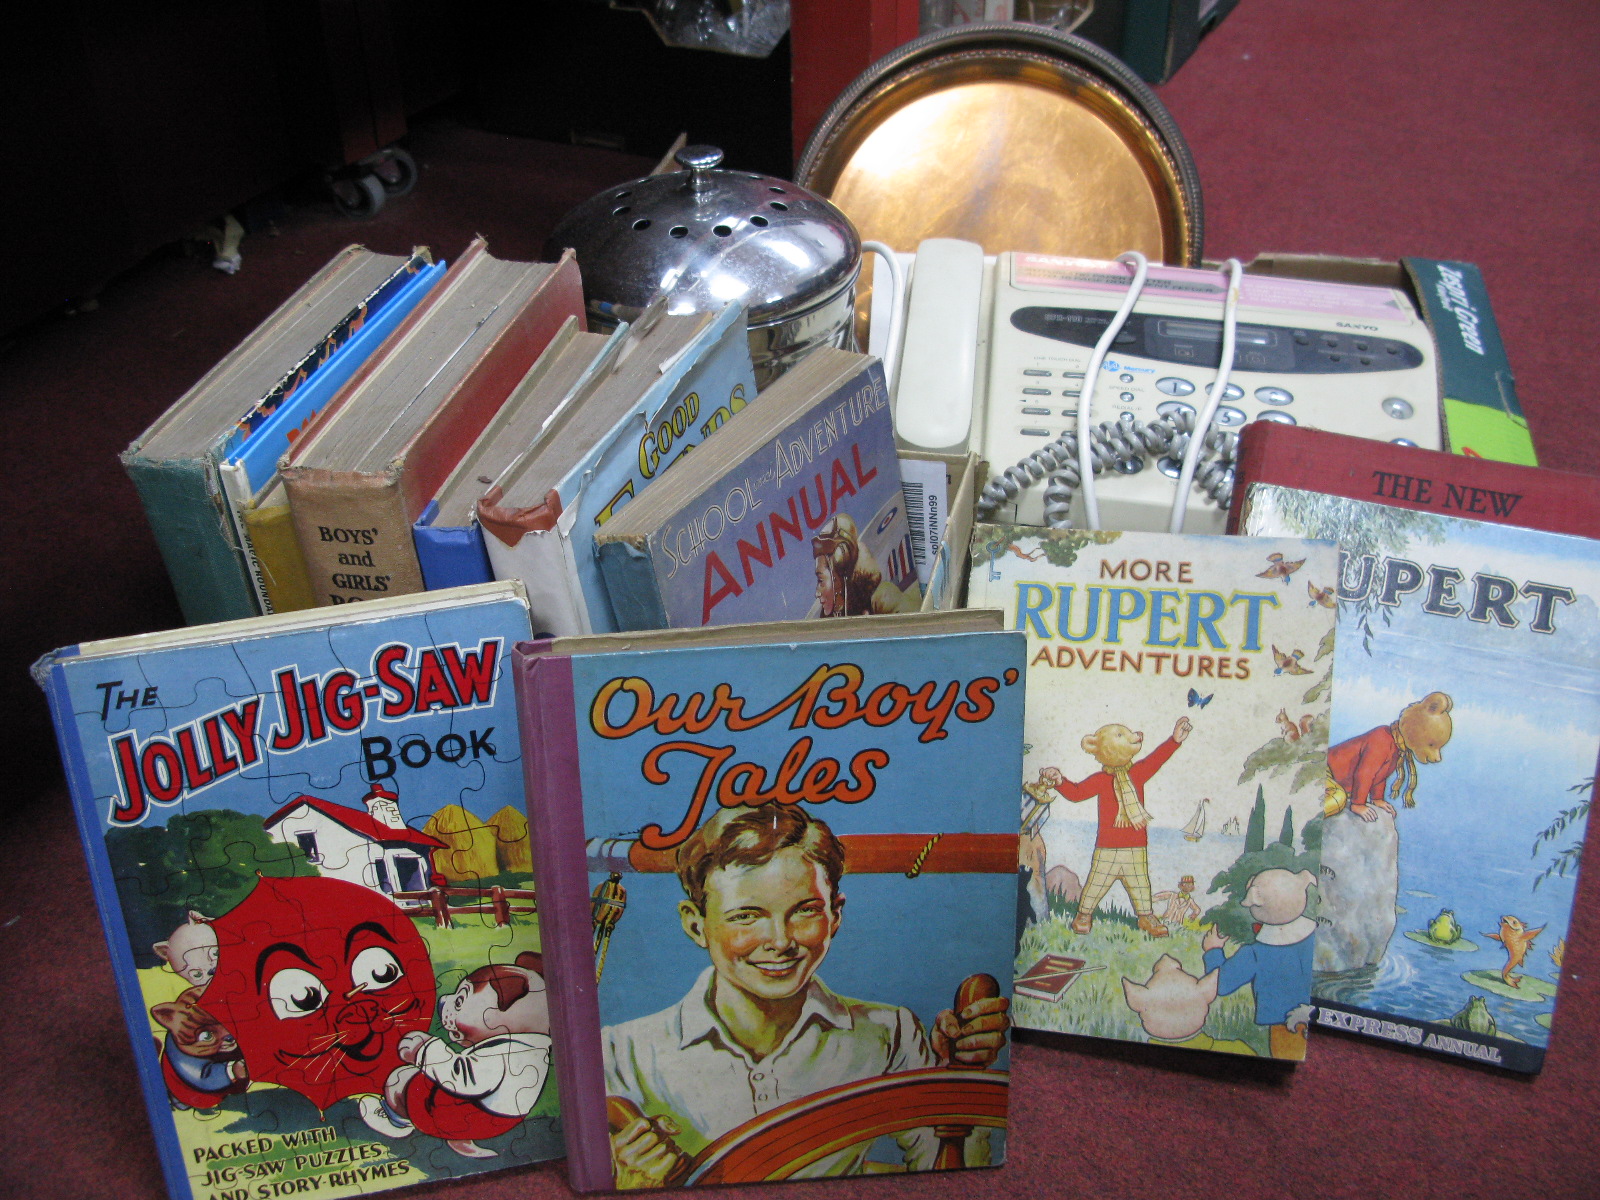 Rupert 1943 and 1969 Annuals, The New Adventures, other annuals, Sanyo fax Machine, etc:- Two Boxes